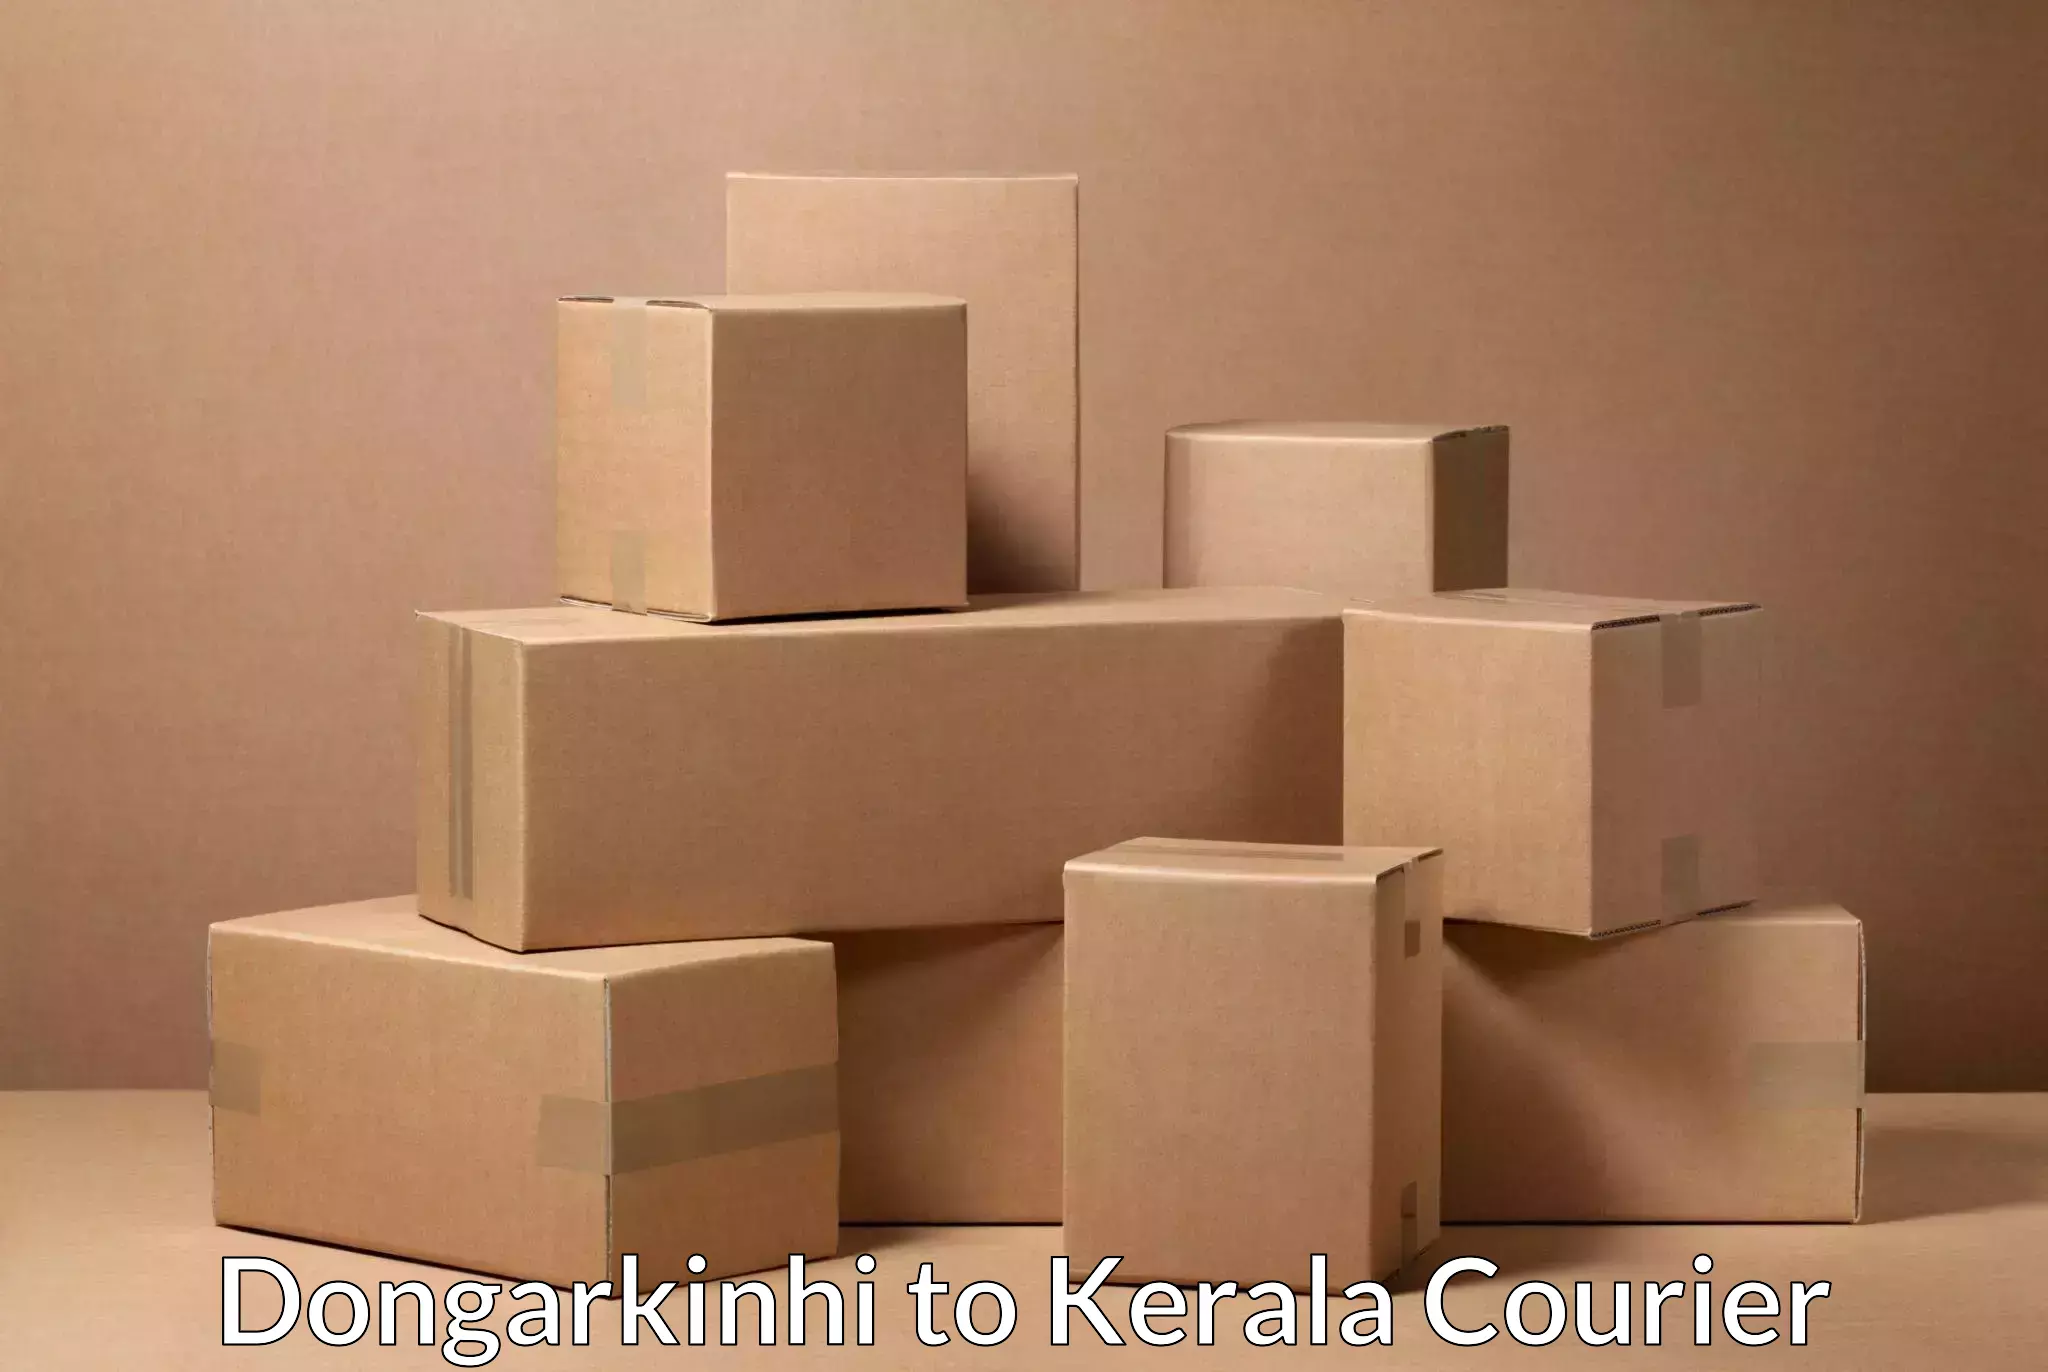 Fast-track shipping solutions Dongarkinhi to Calicut